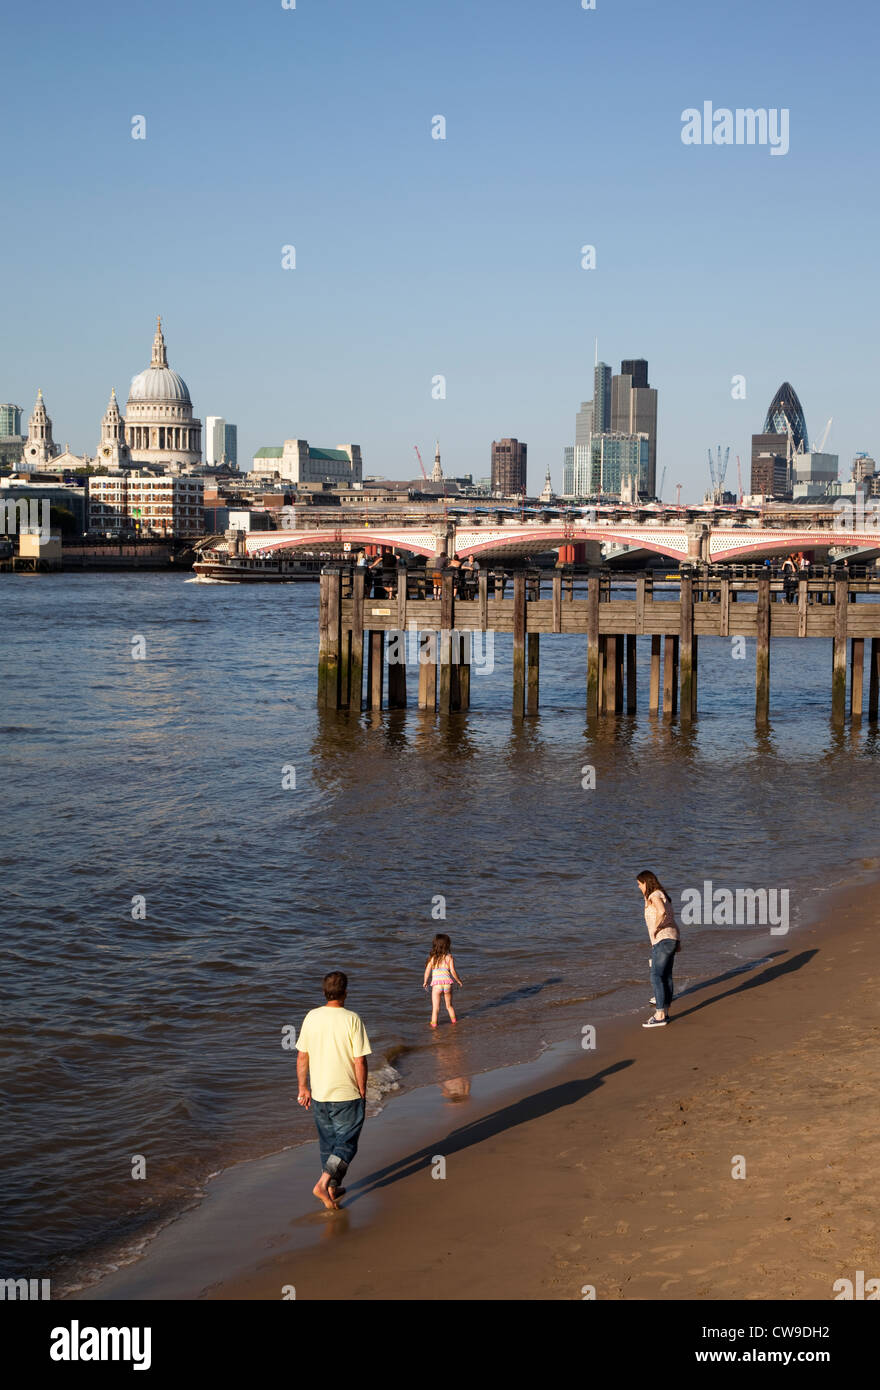 A family walks on the sands exposed at low tide along the Thames, London Stock Photo